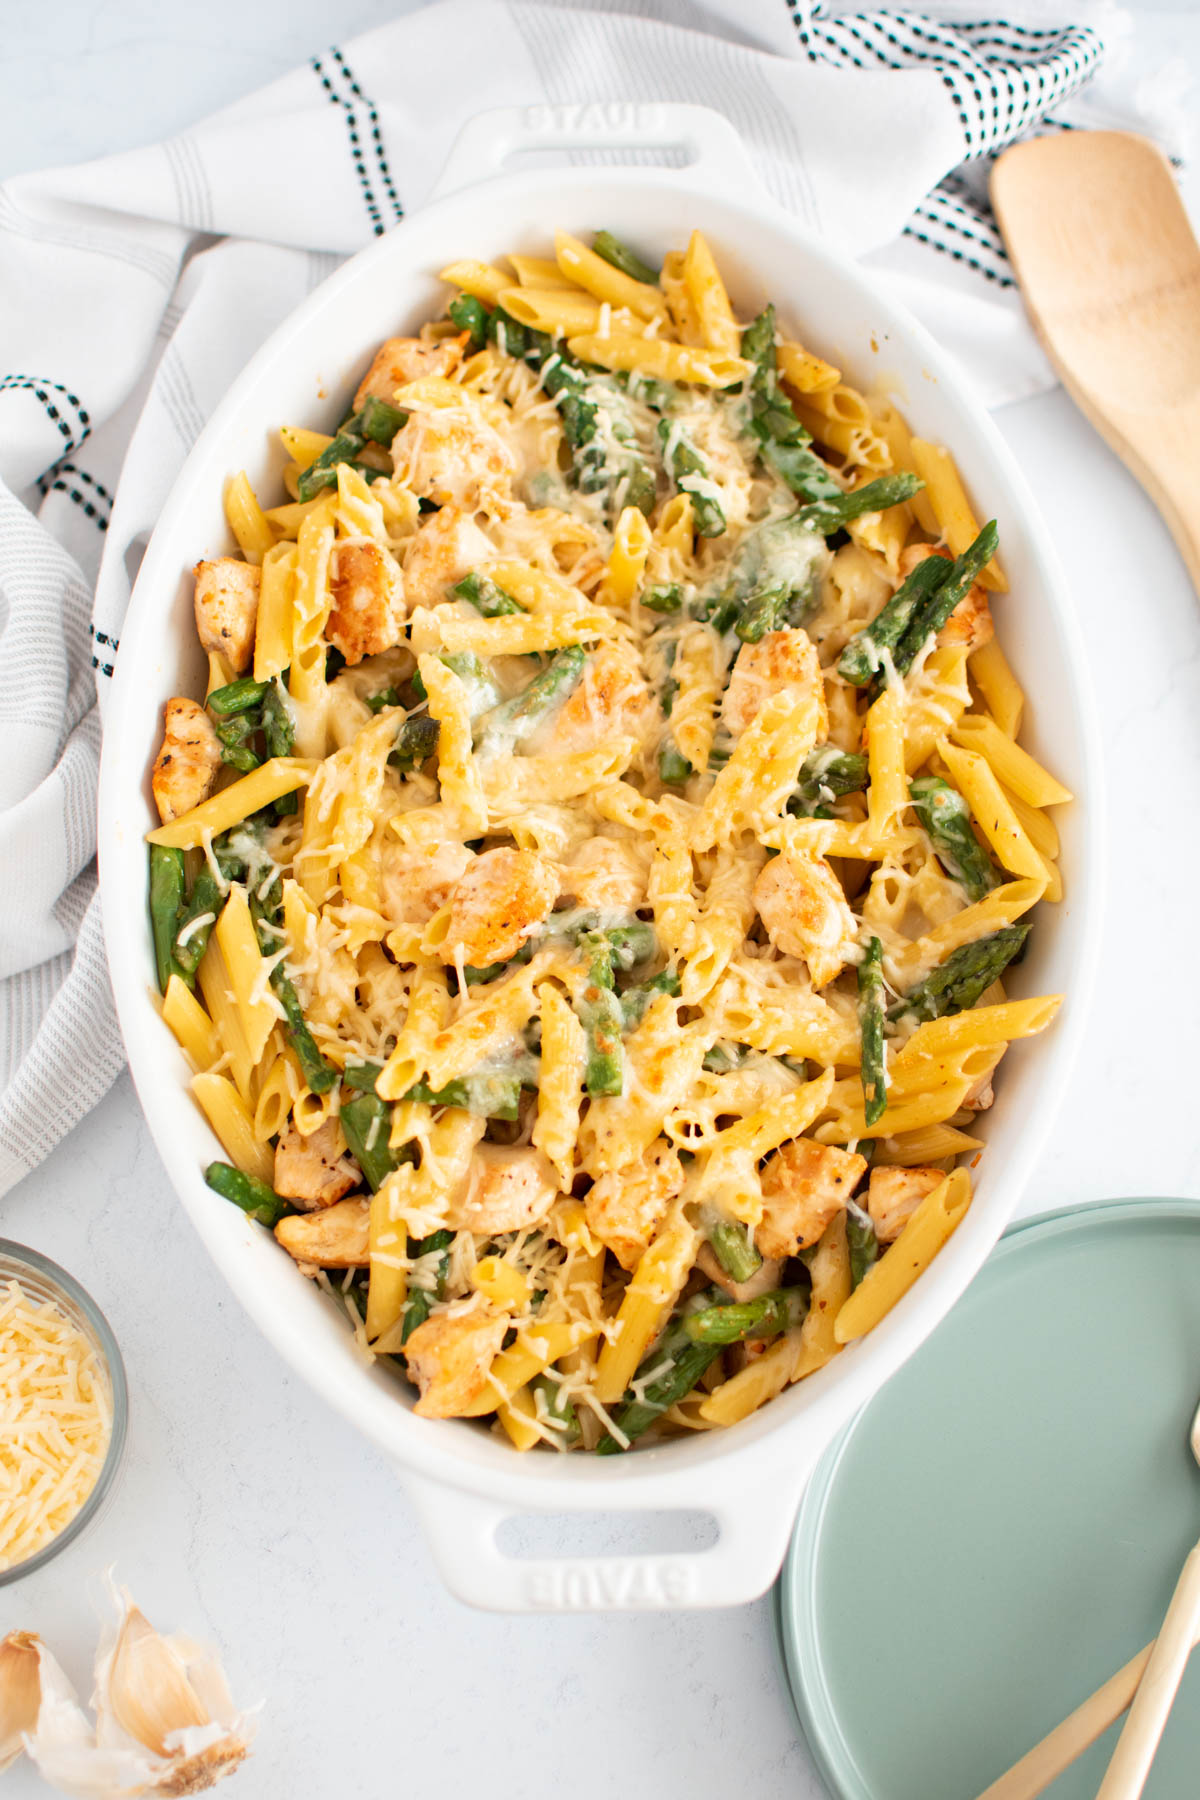 Chicken and asparagus pasta in white baking dish surrounded by plates, towel, and wood spoon.